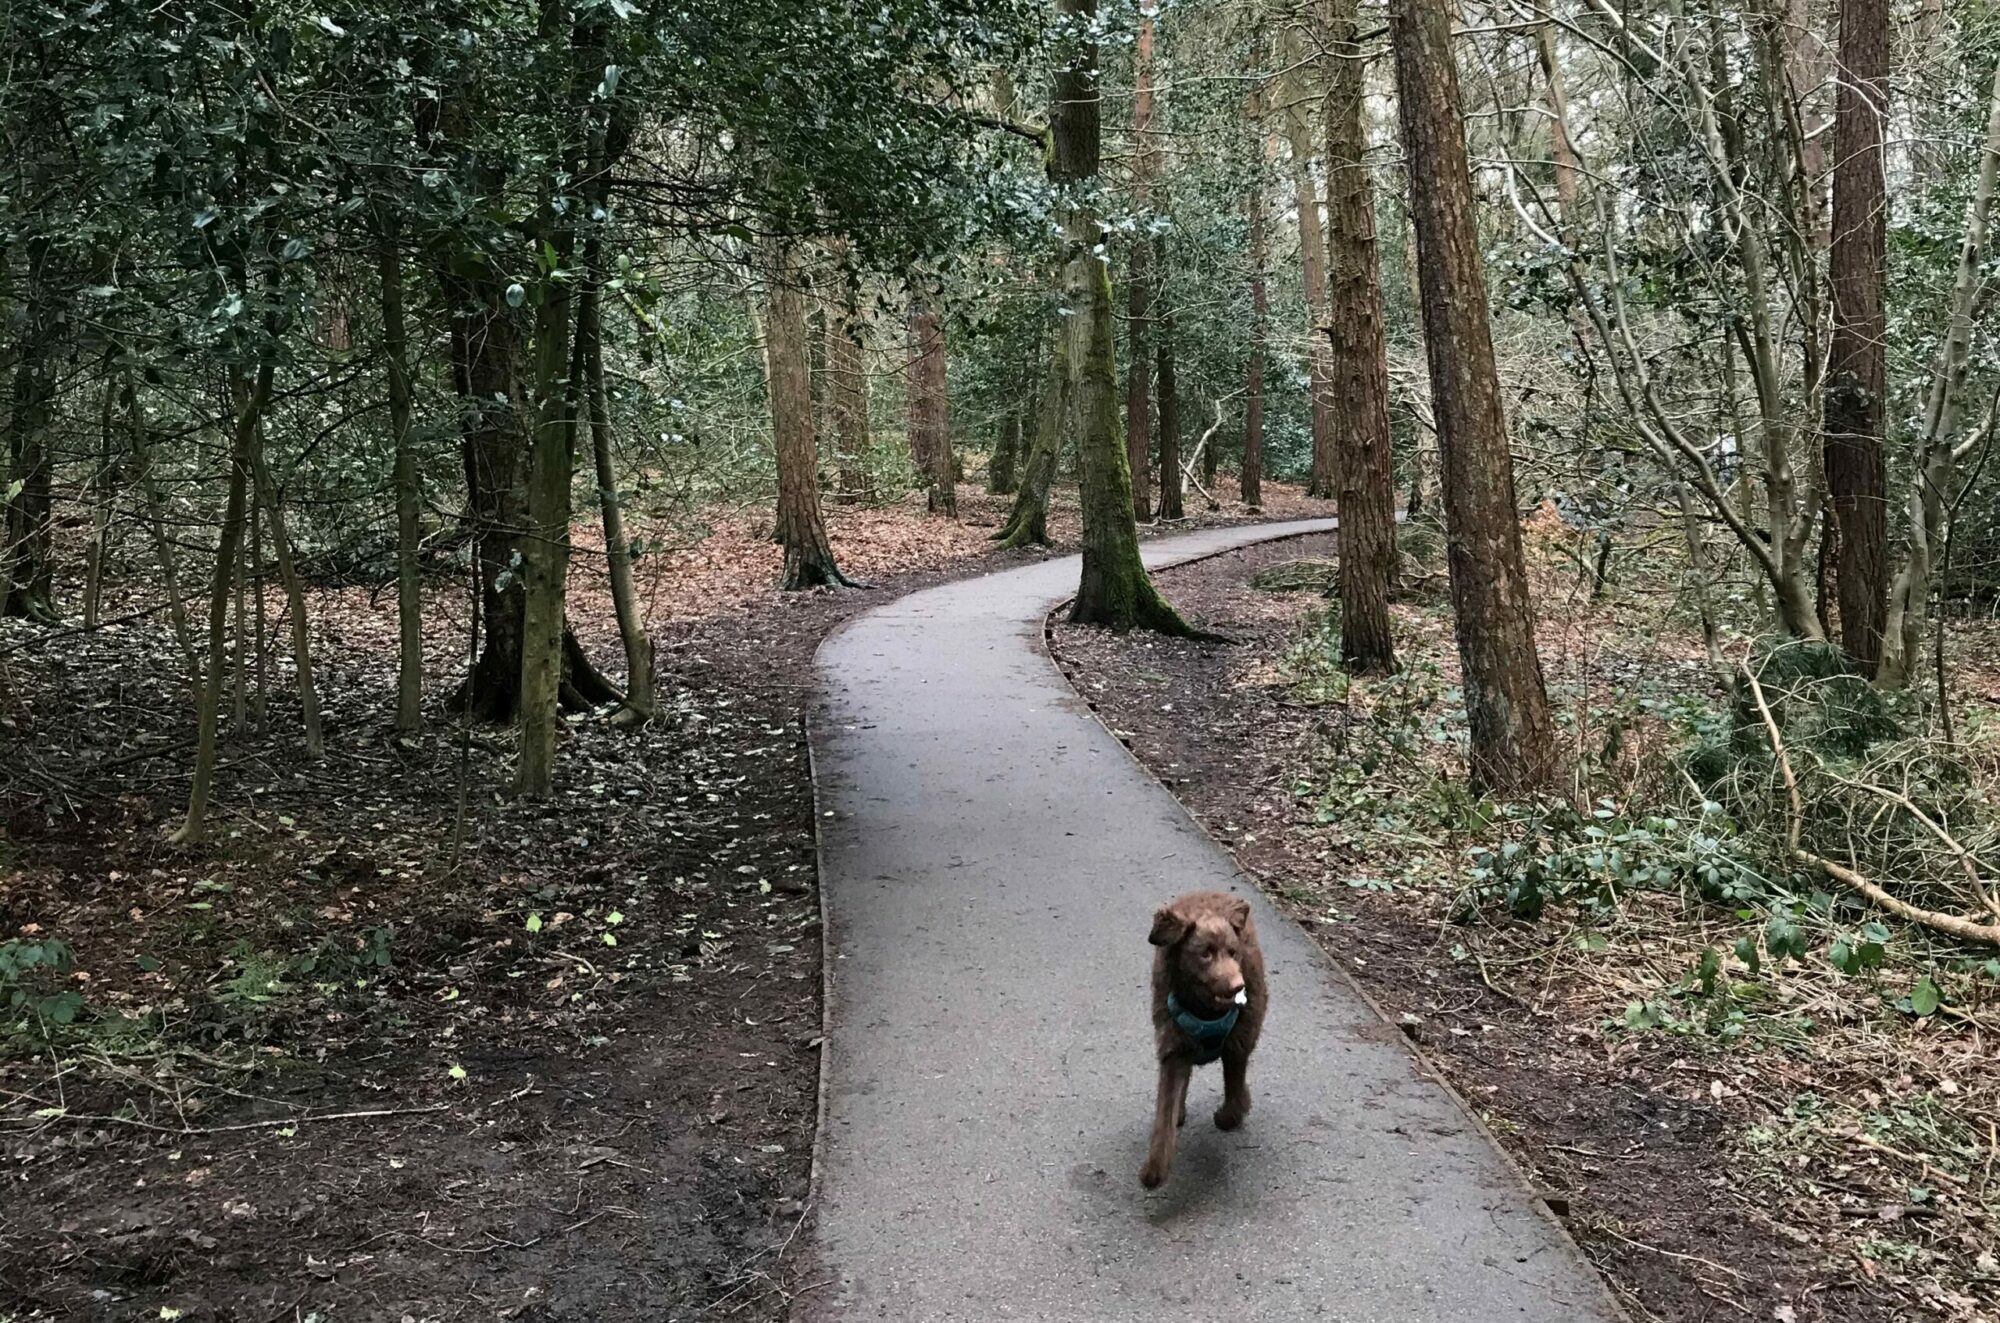 A small brown dog running towards the camera along a path through a woods